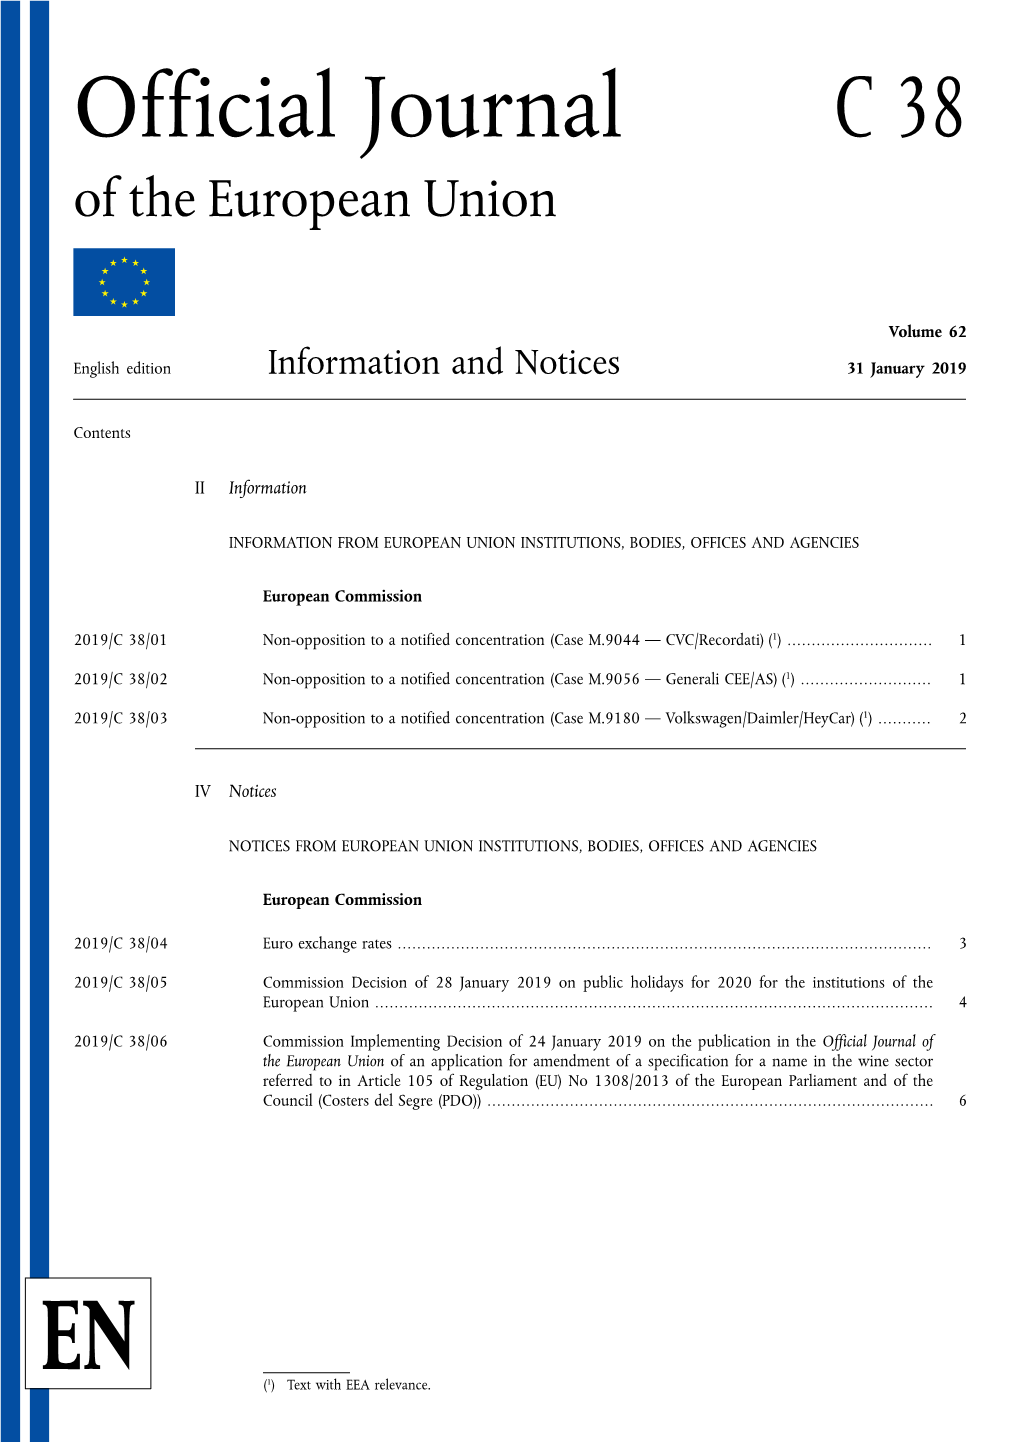 Official Journal C 38 of the European Union